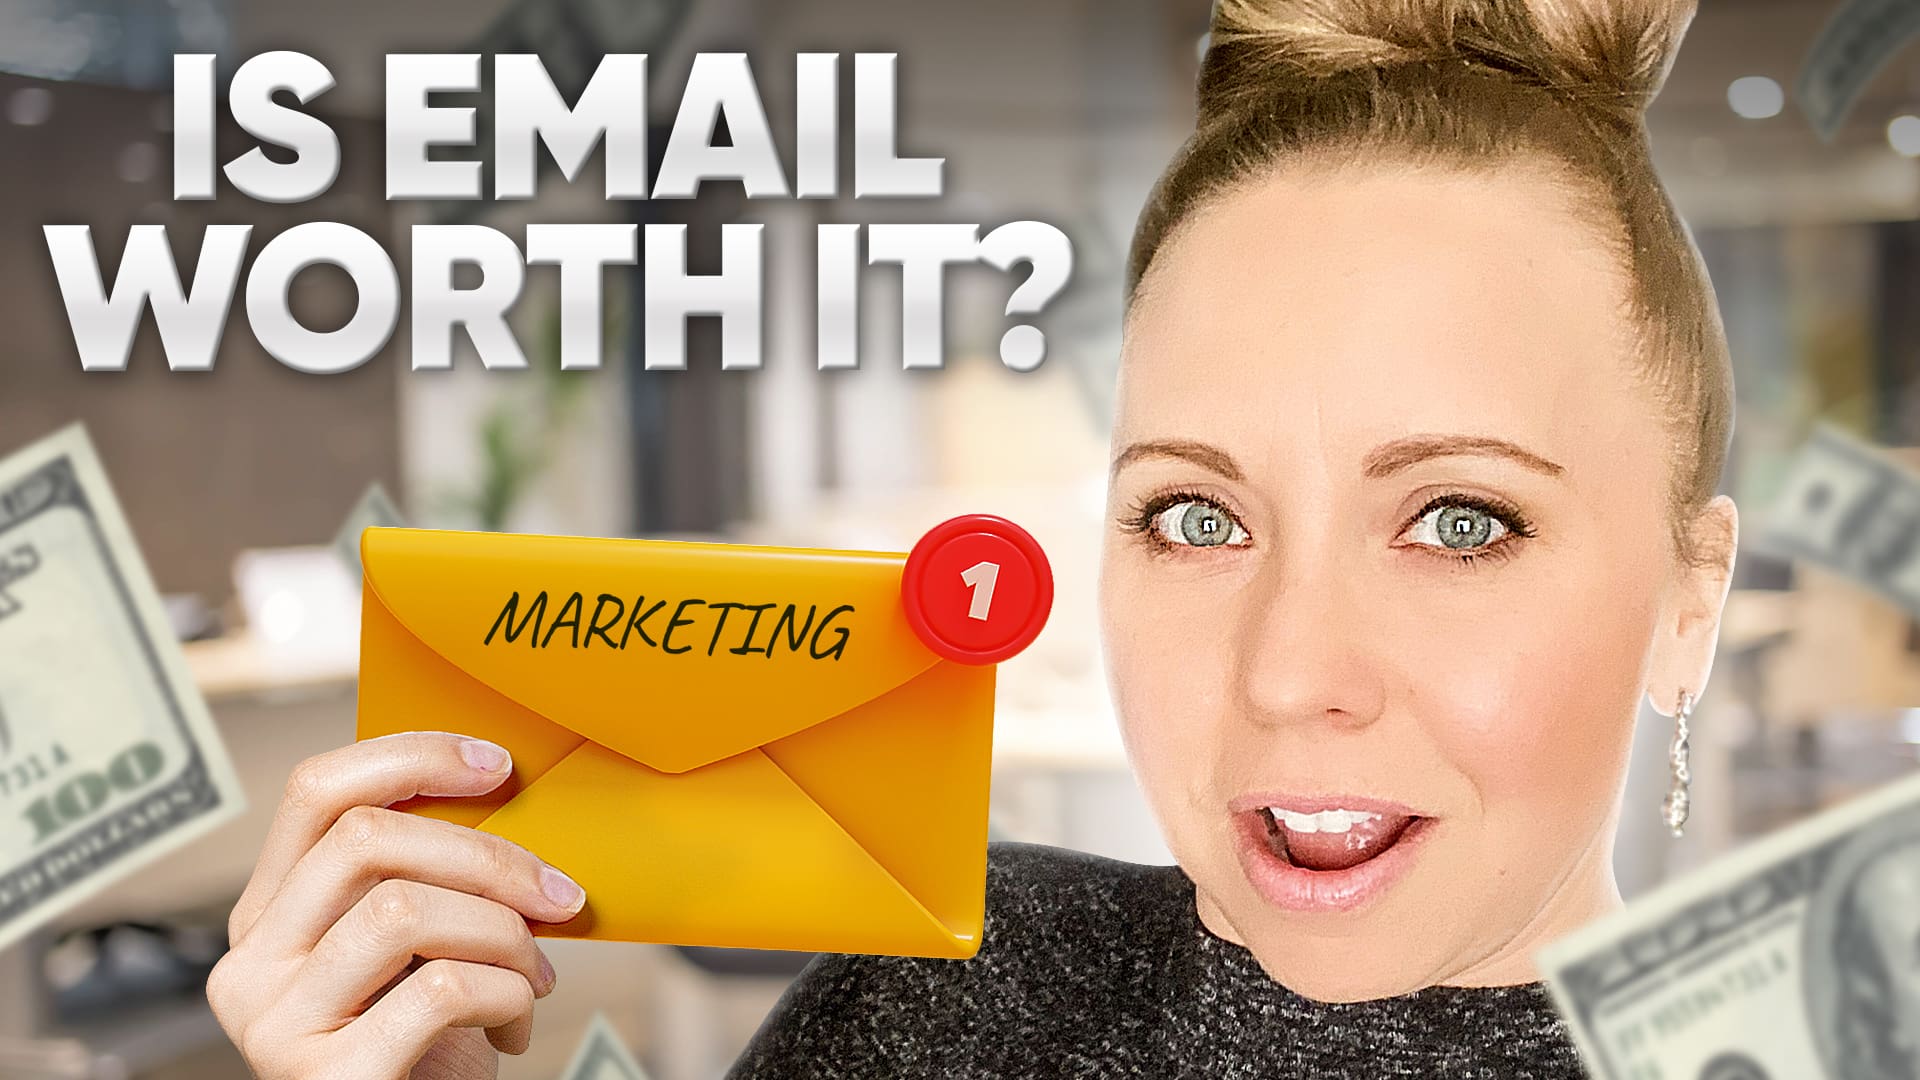 Mastering Email Marketing - 5 EASY Stress-Free Steps